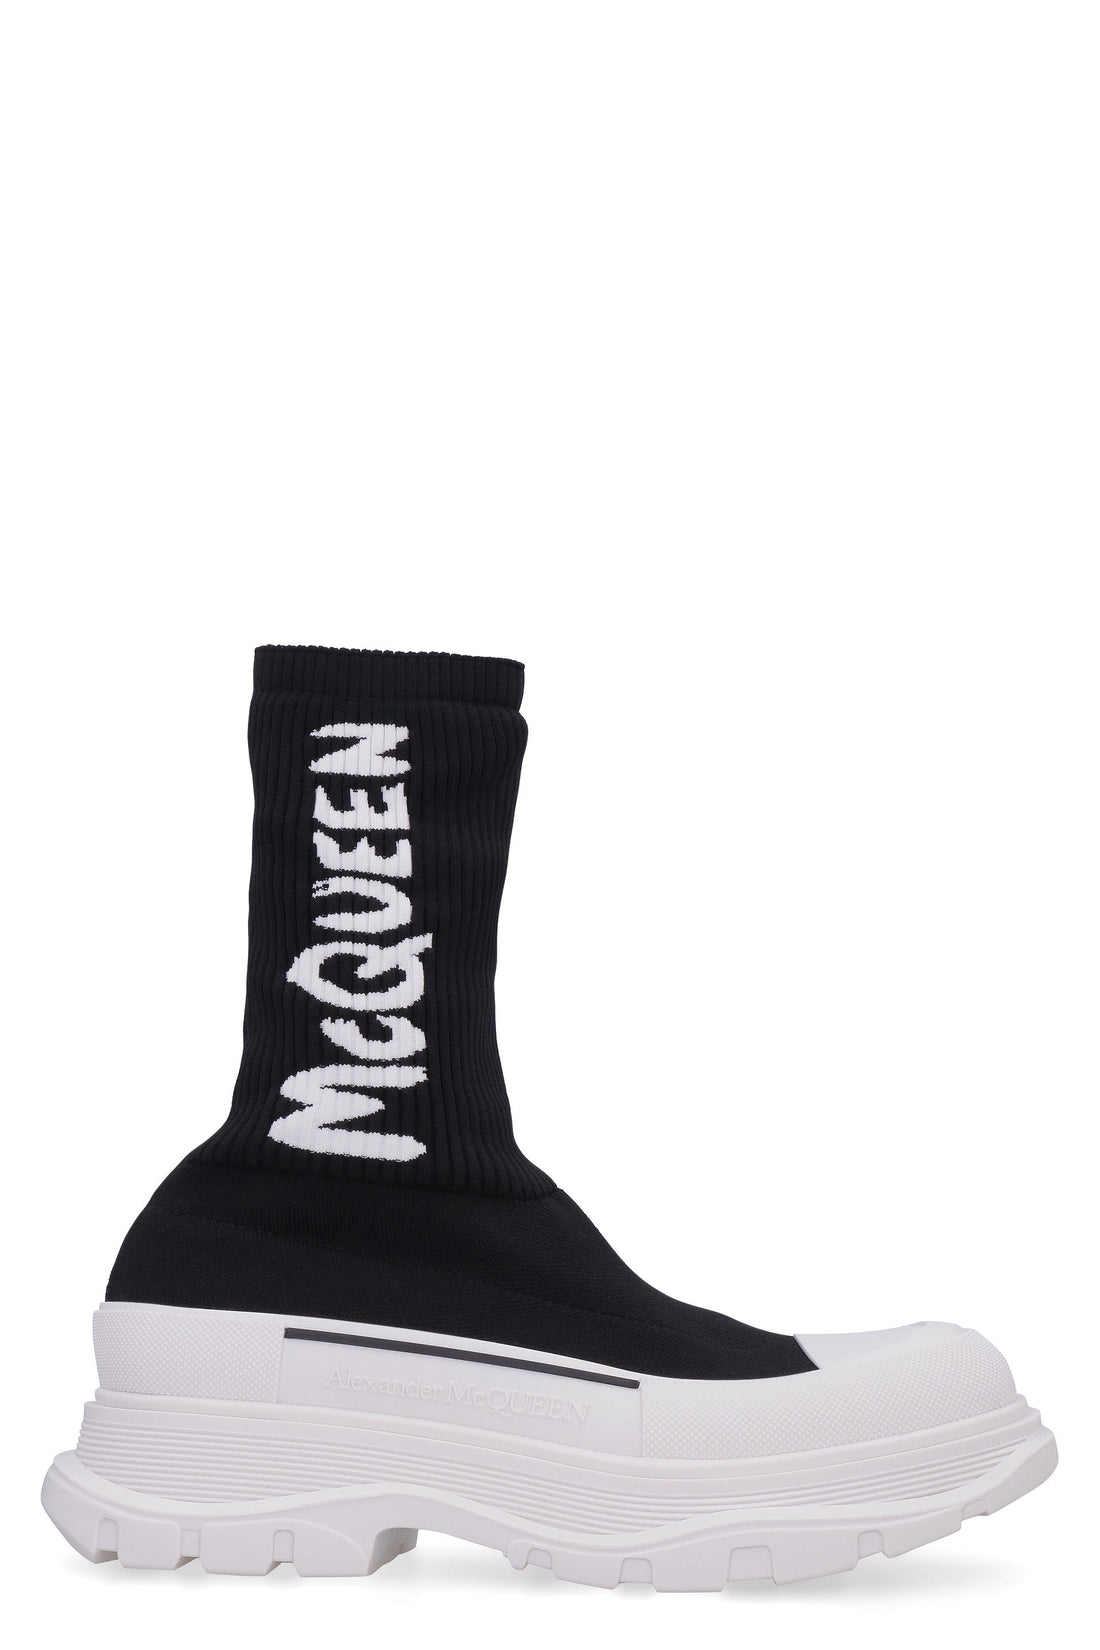 Alexander McQueen-OUTLET-SALE-Tread Slick knitted boots-ARCHIVIST